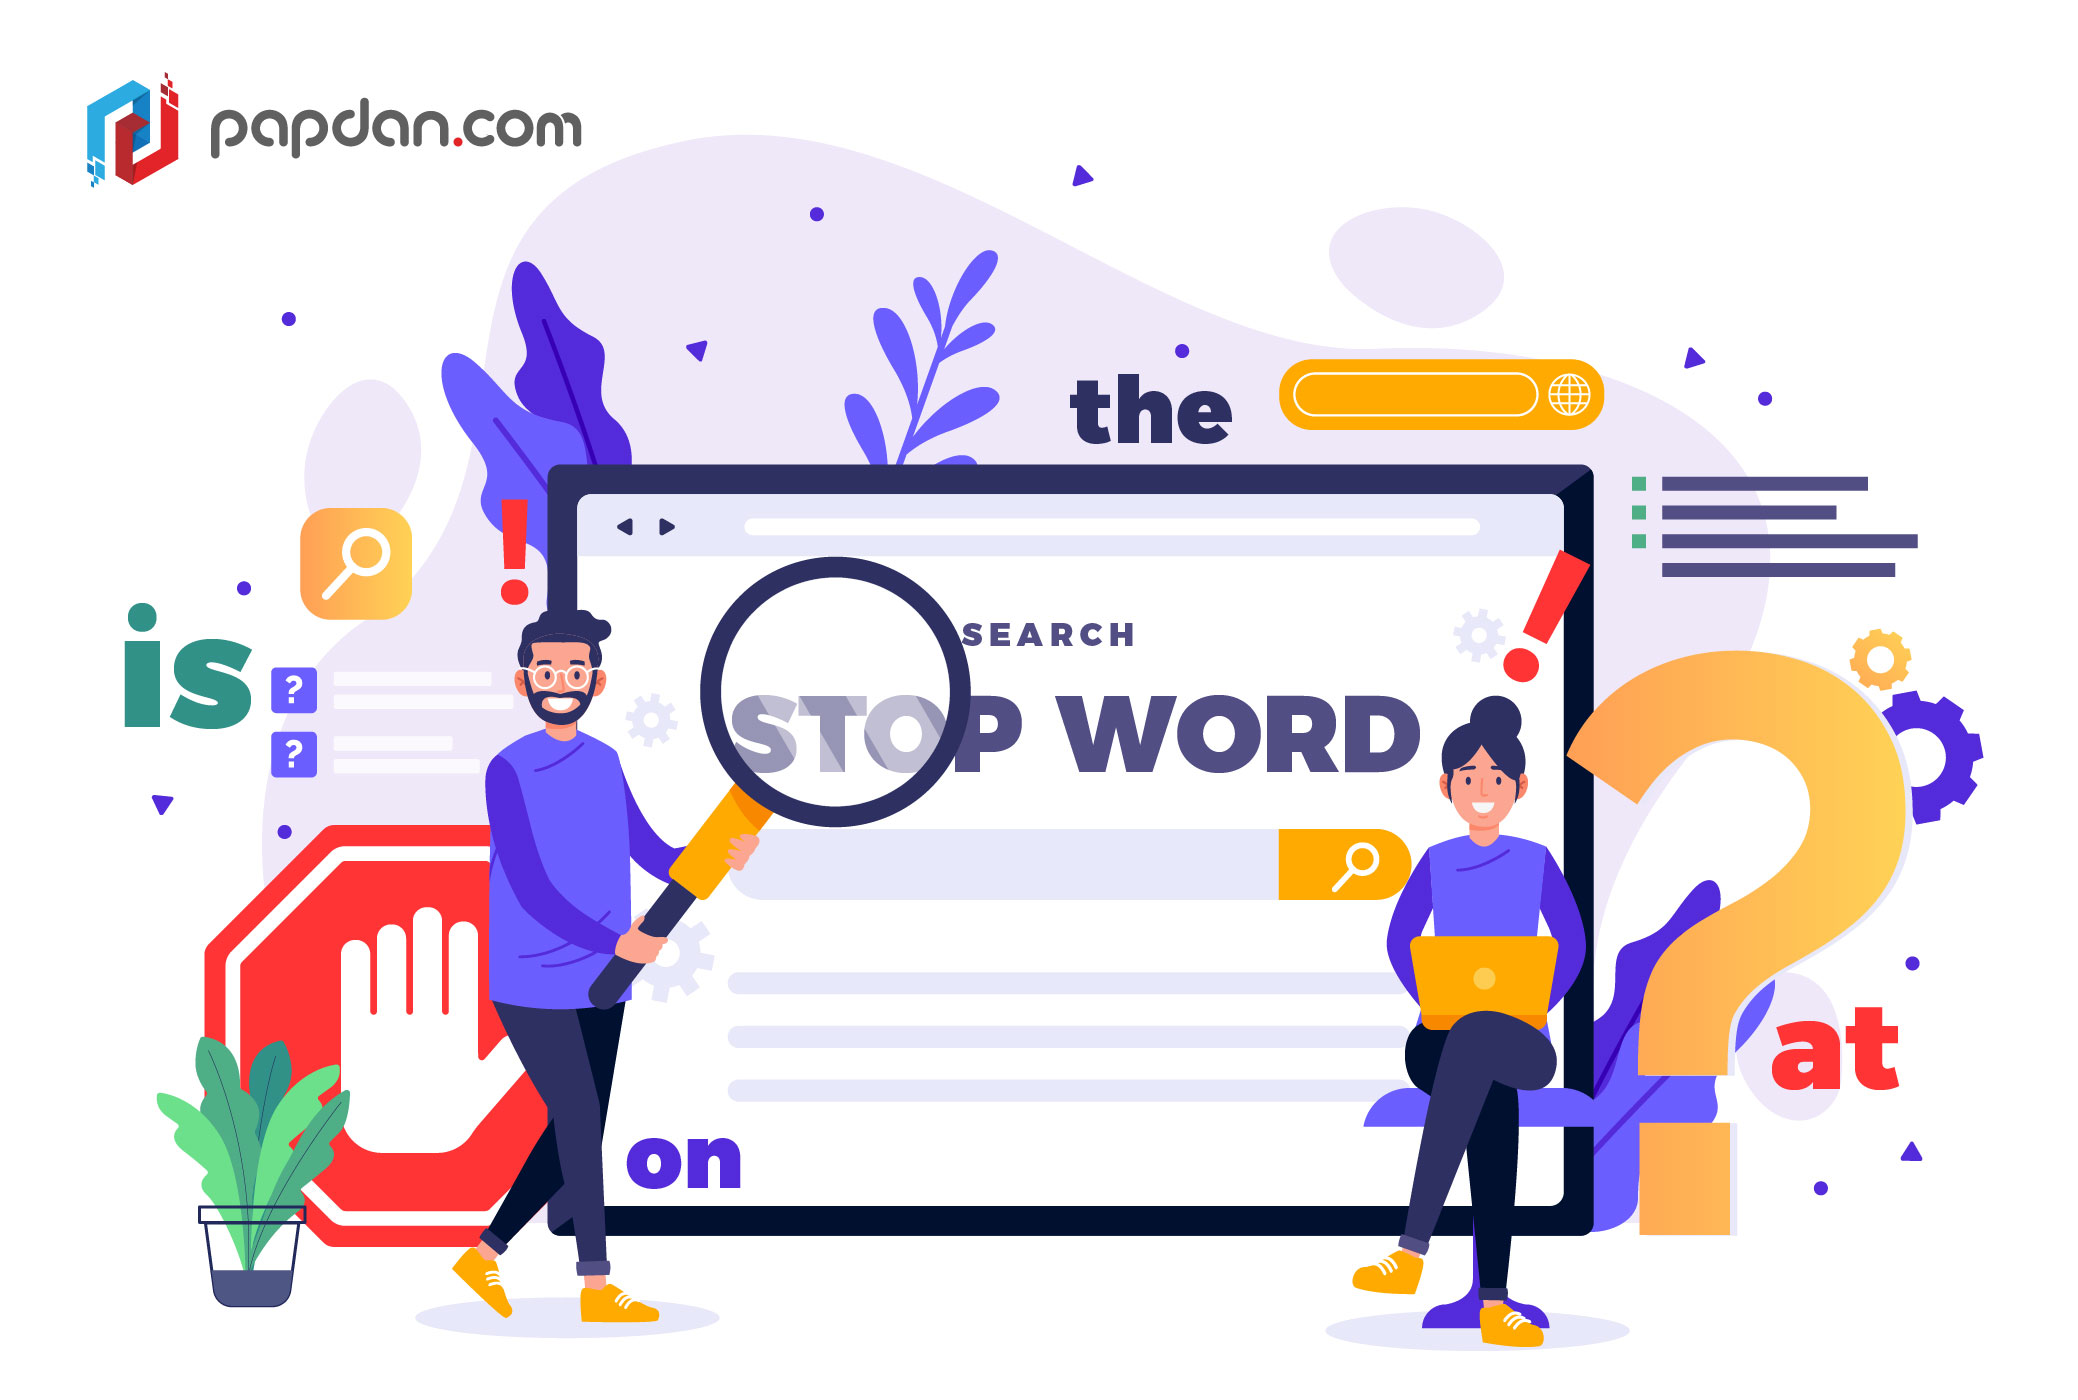 Should You Stop Using Stop Word?